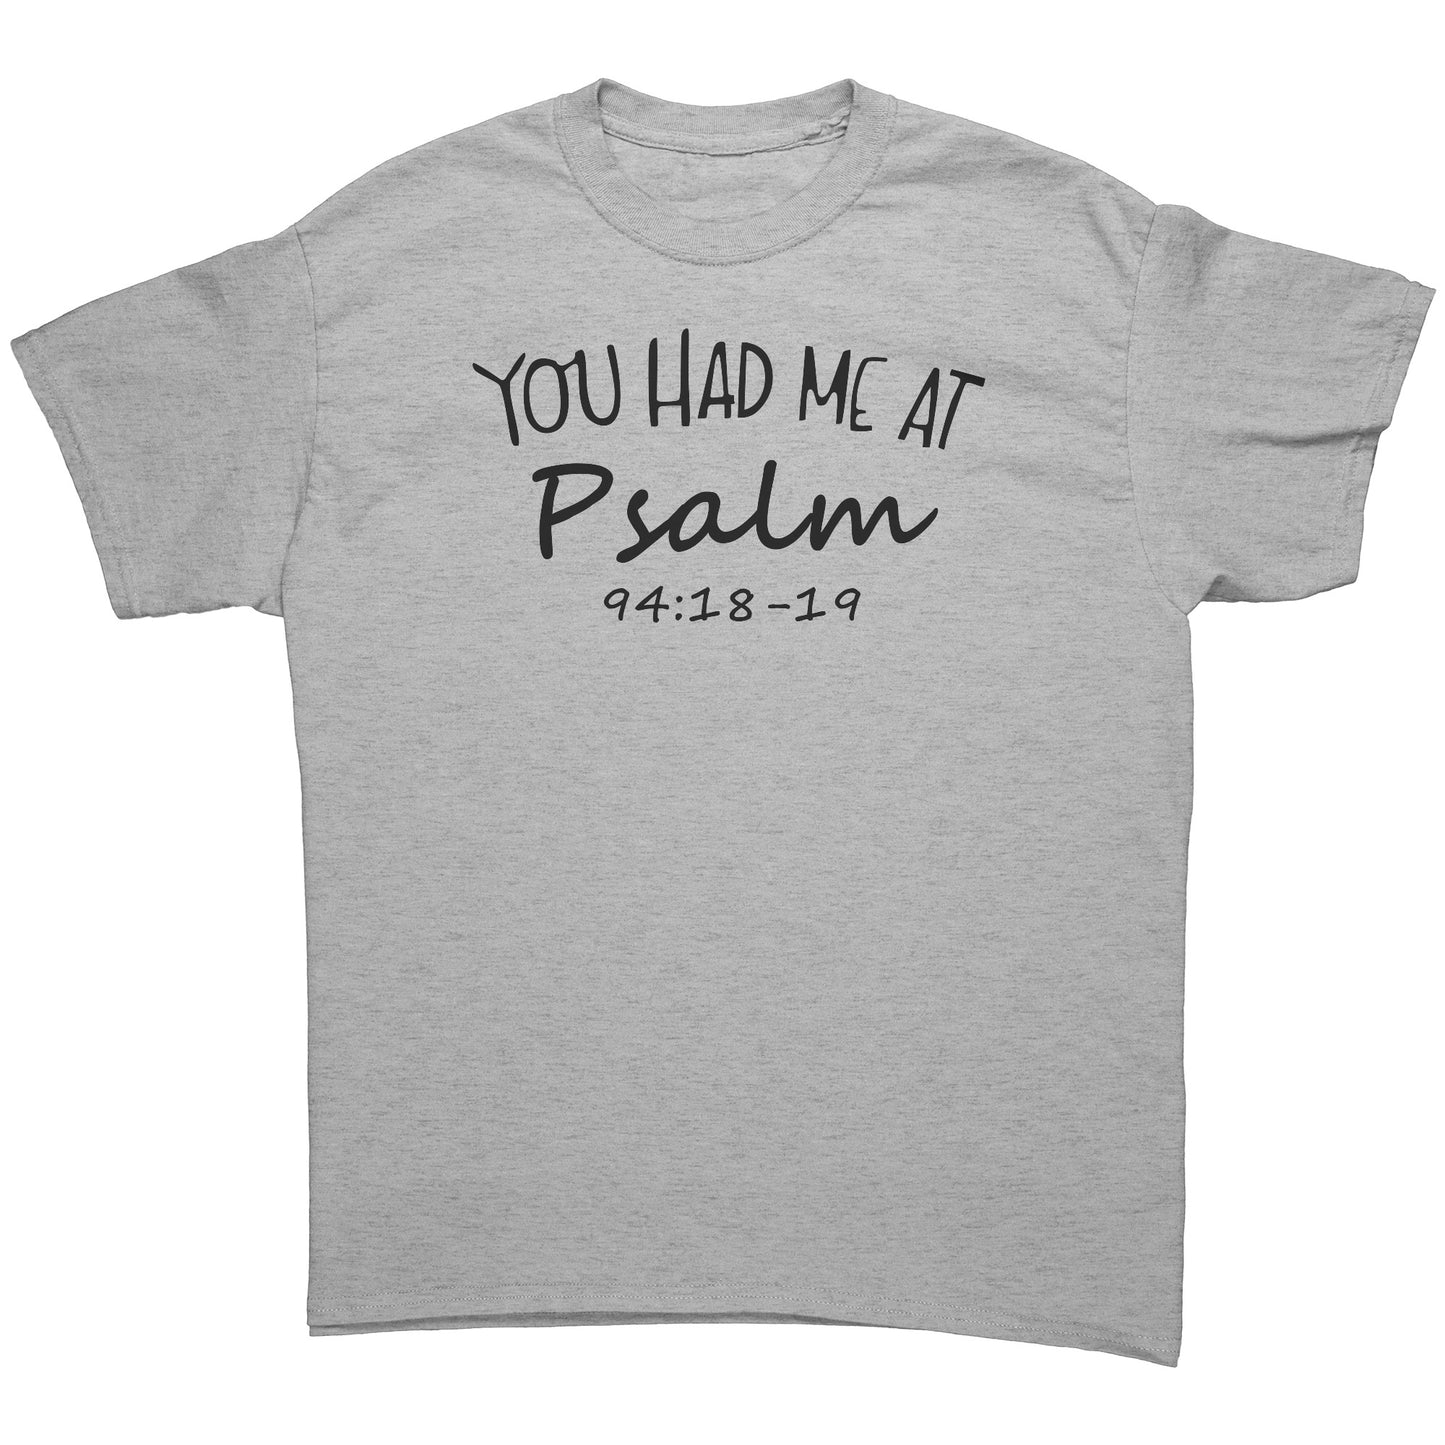 You Had Me At Psalm 94:18-19 Men's T-Shirt Part 1